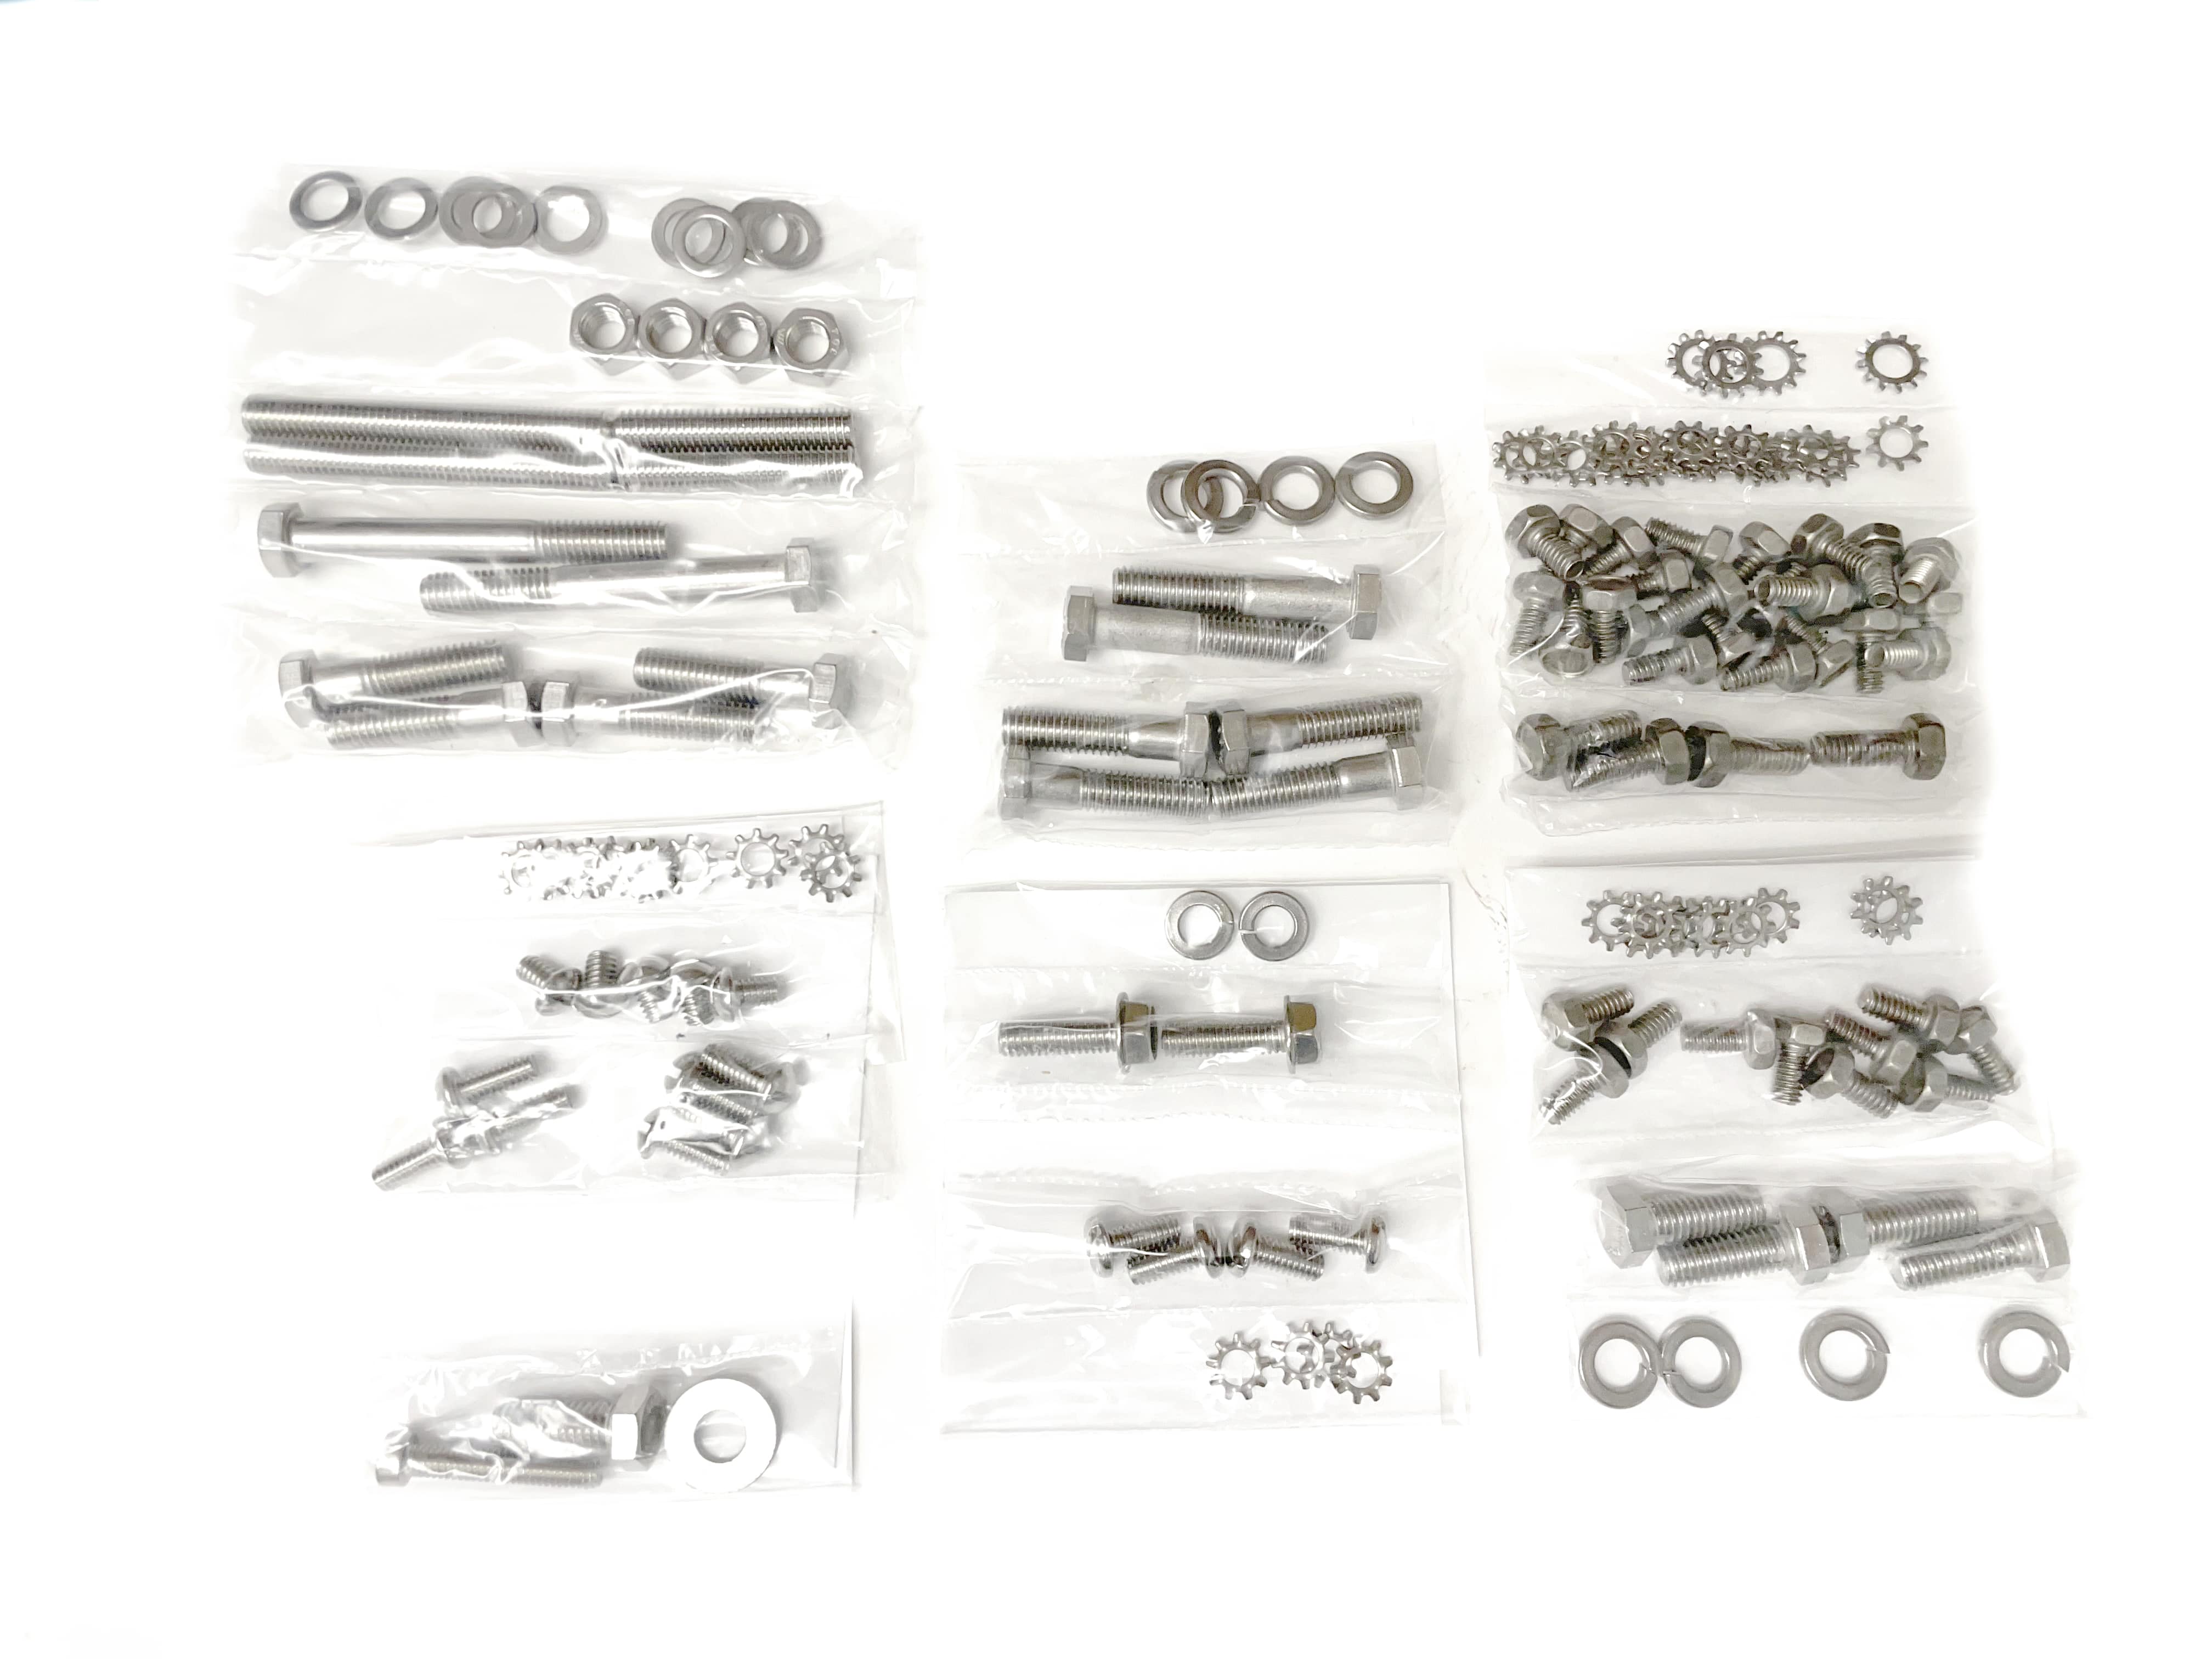 1954-1955 Engine Bolt Kit Stainless Steel 235 Engine Chevrolet and GMC Pickup Truck